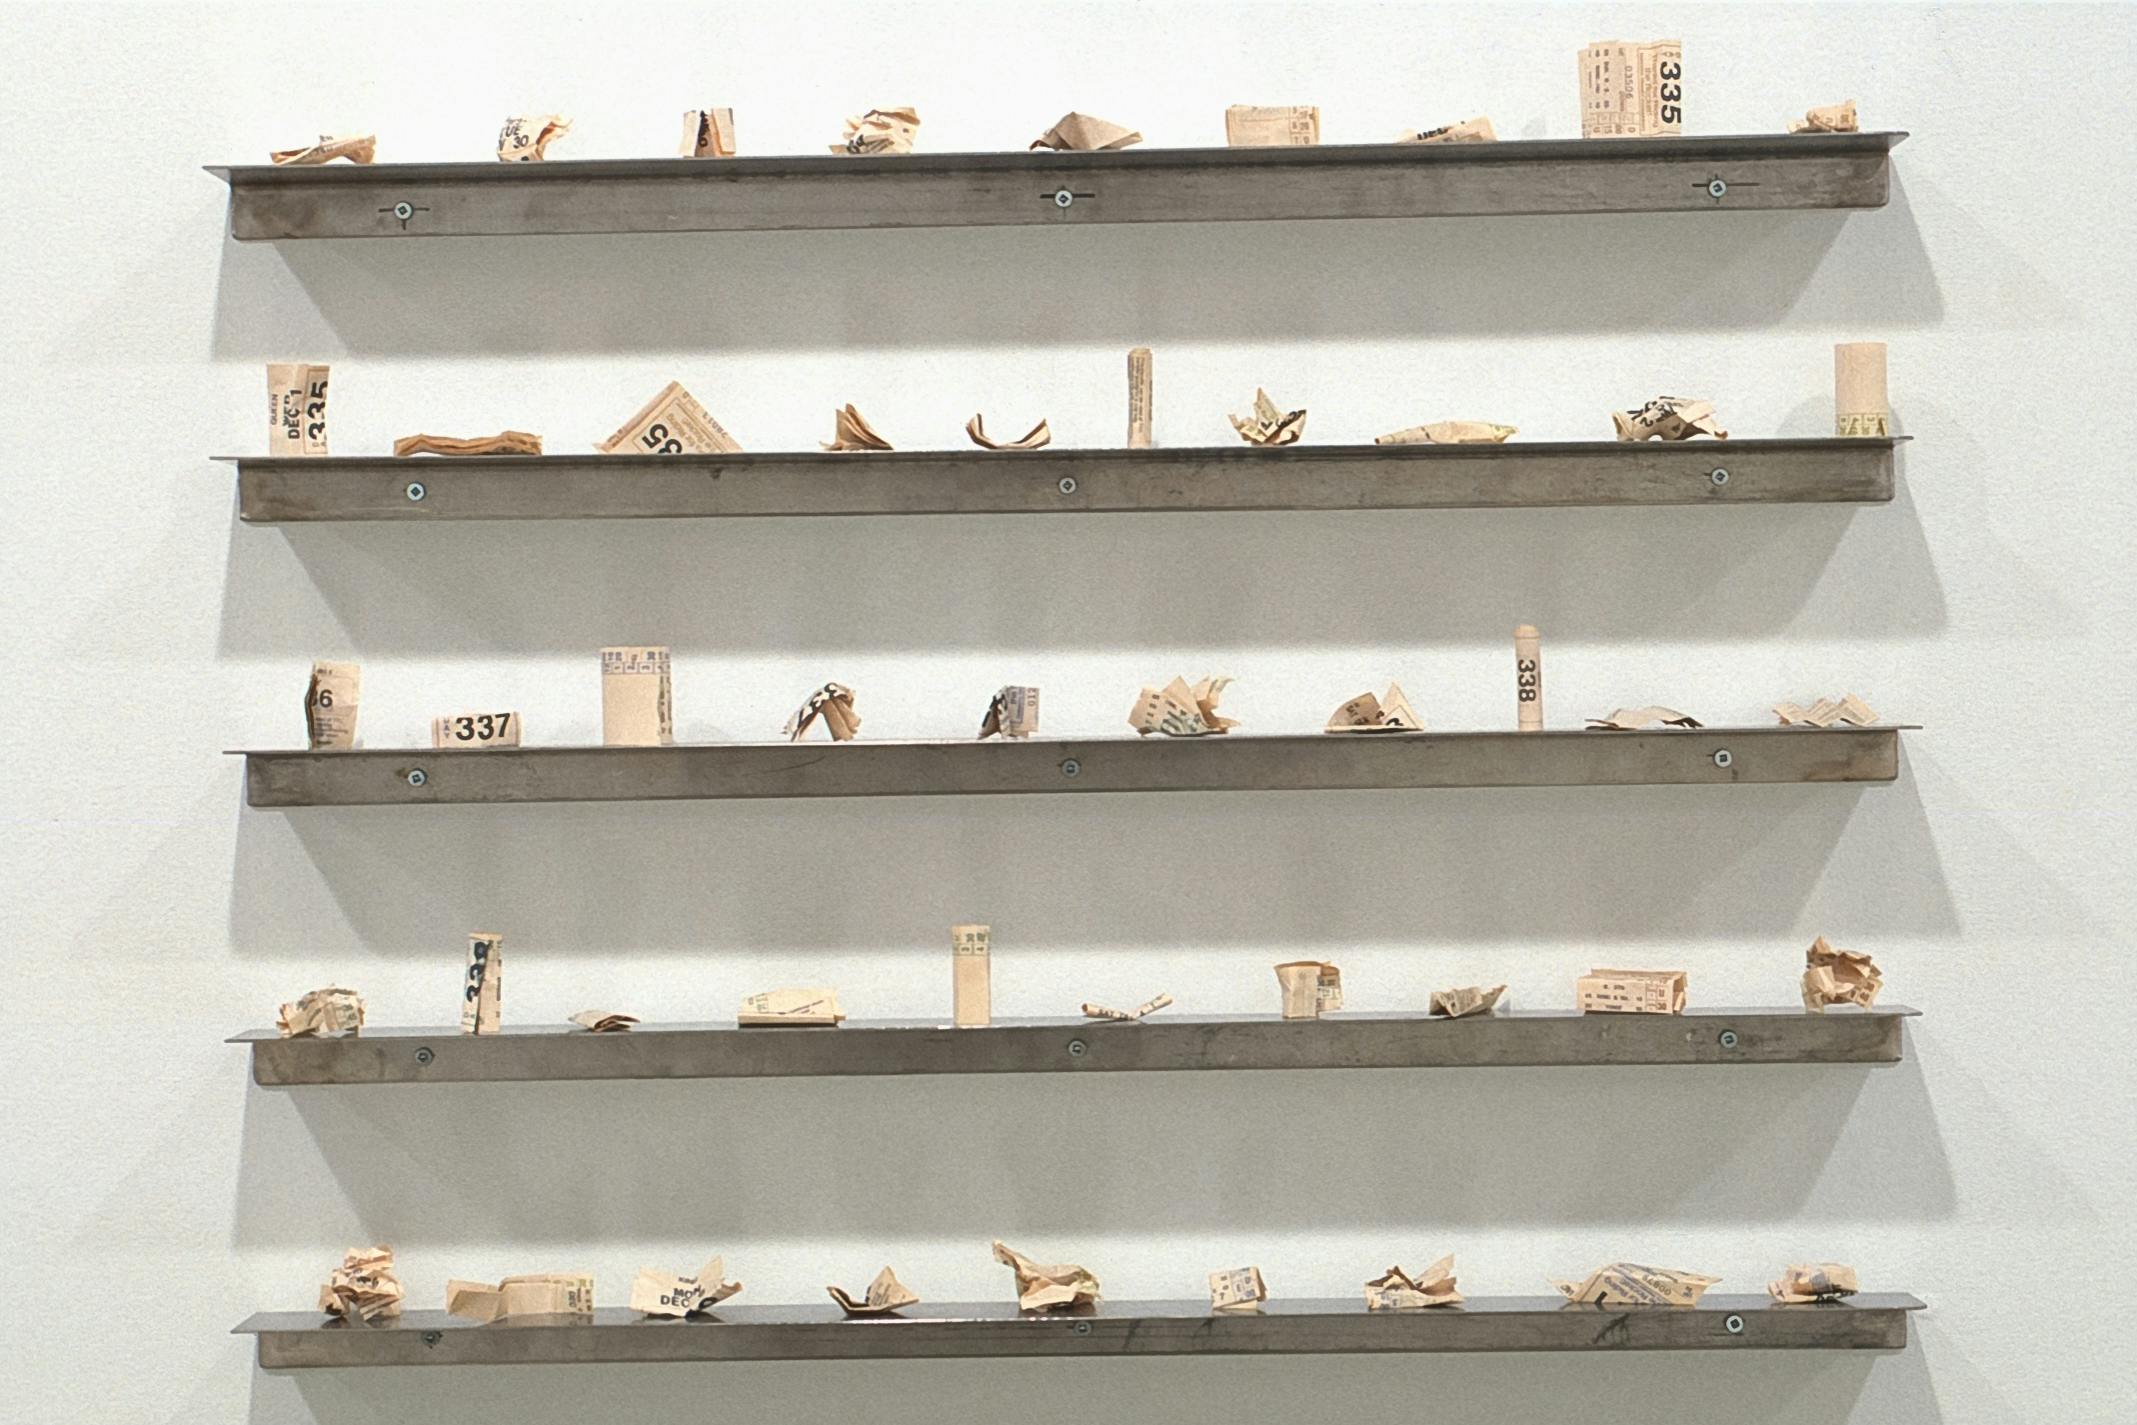 Small-sized sculptures are installed on the white gallery wall. They are all made out of crumpled paper. Some look more cylindrical than others. There are five rows of ten sculptures on the wall.